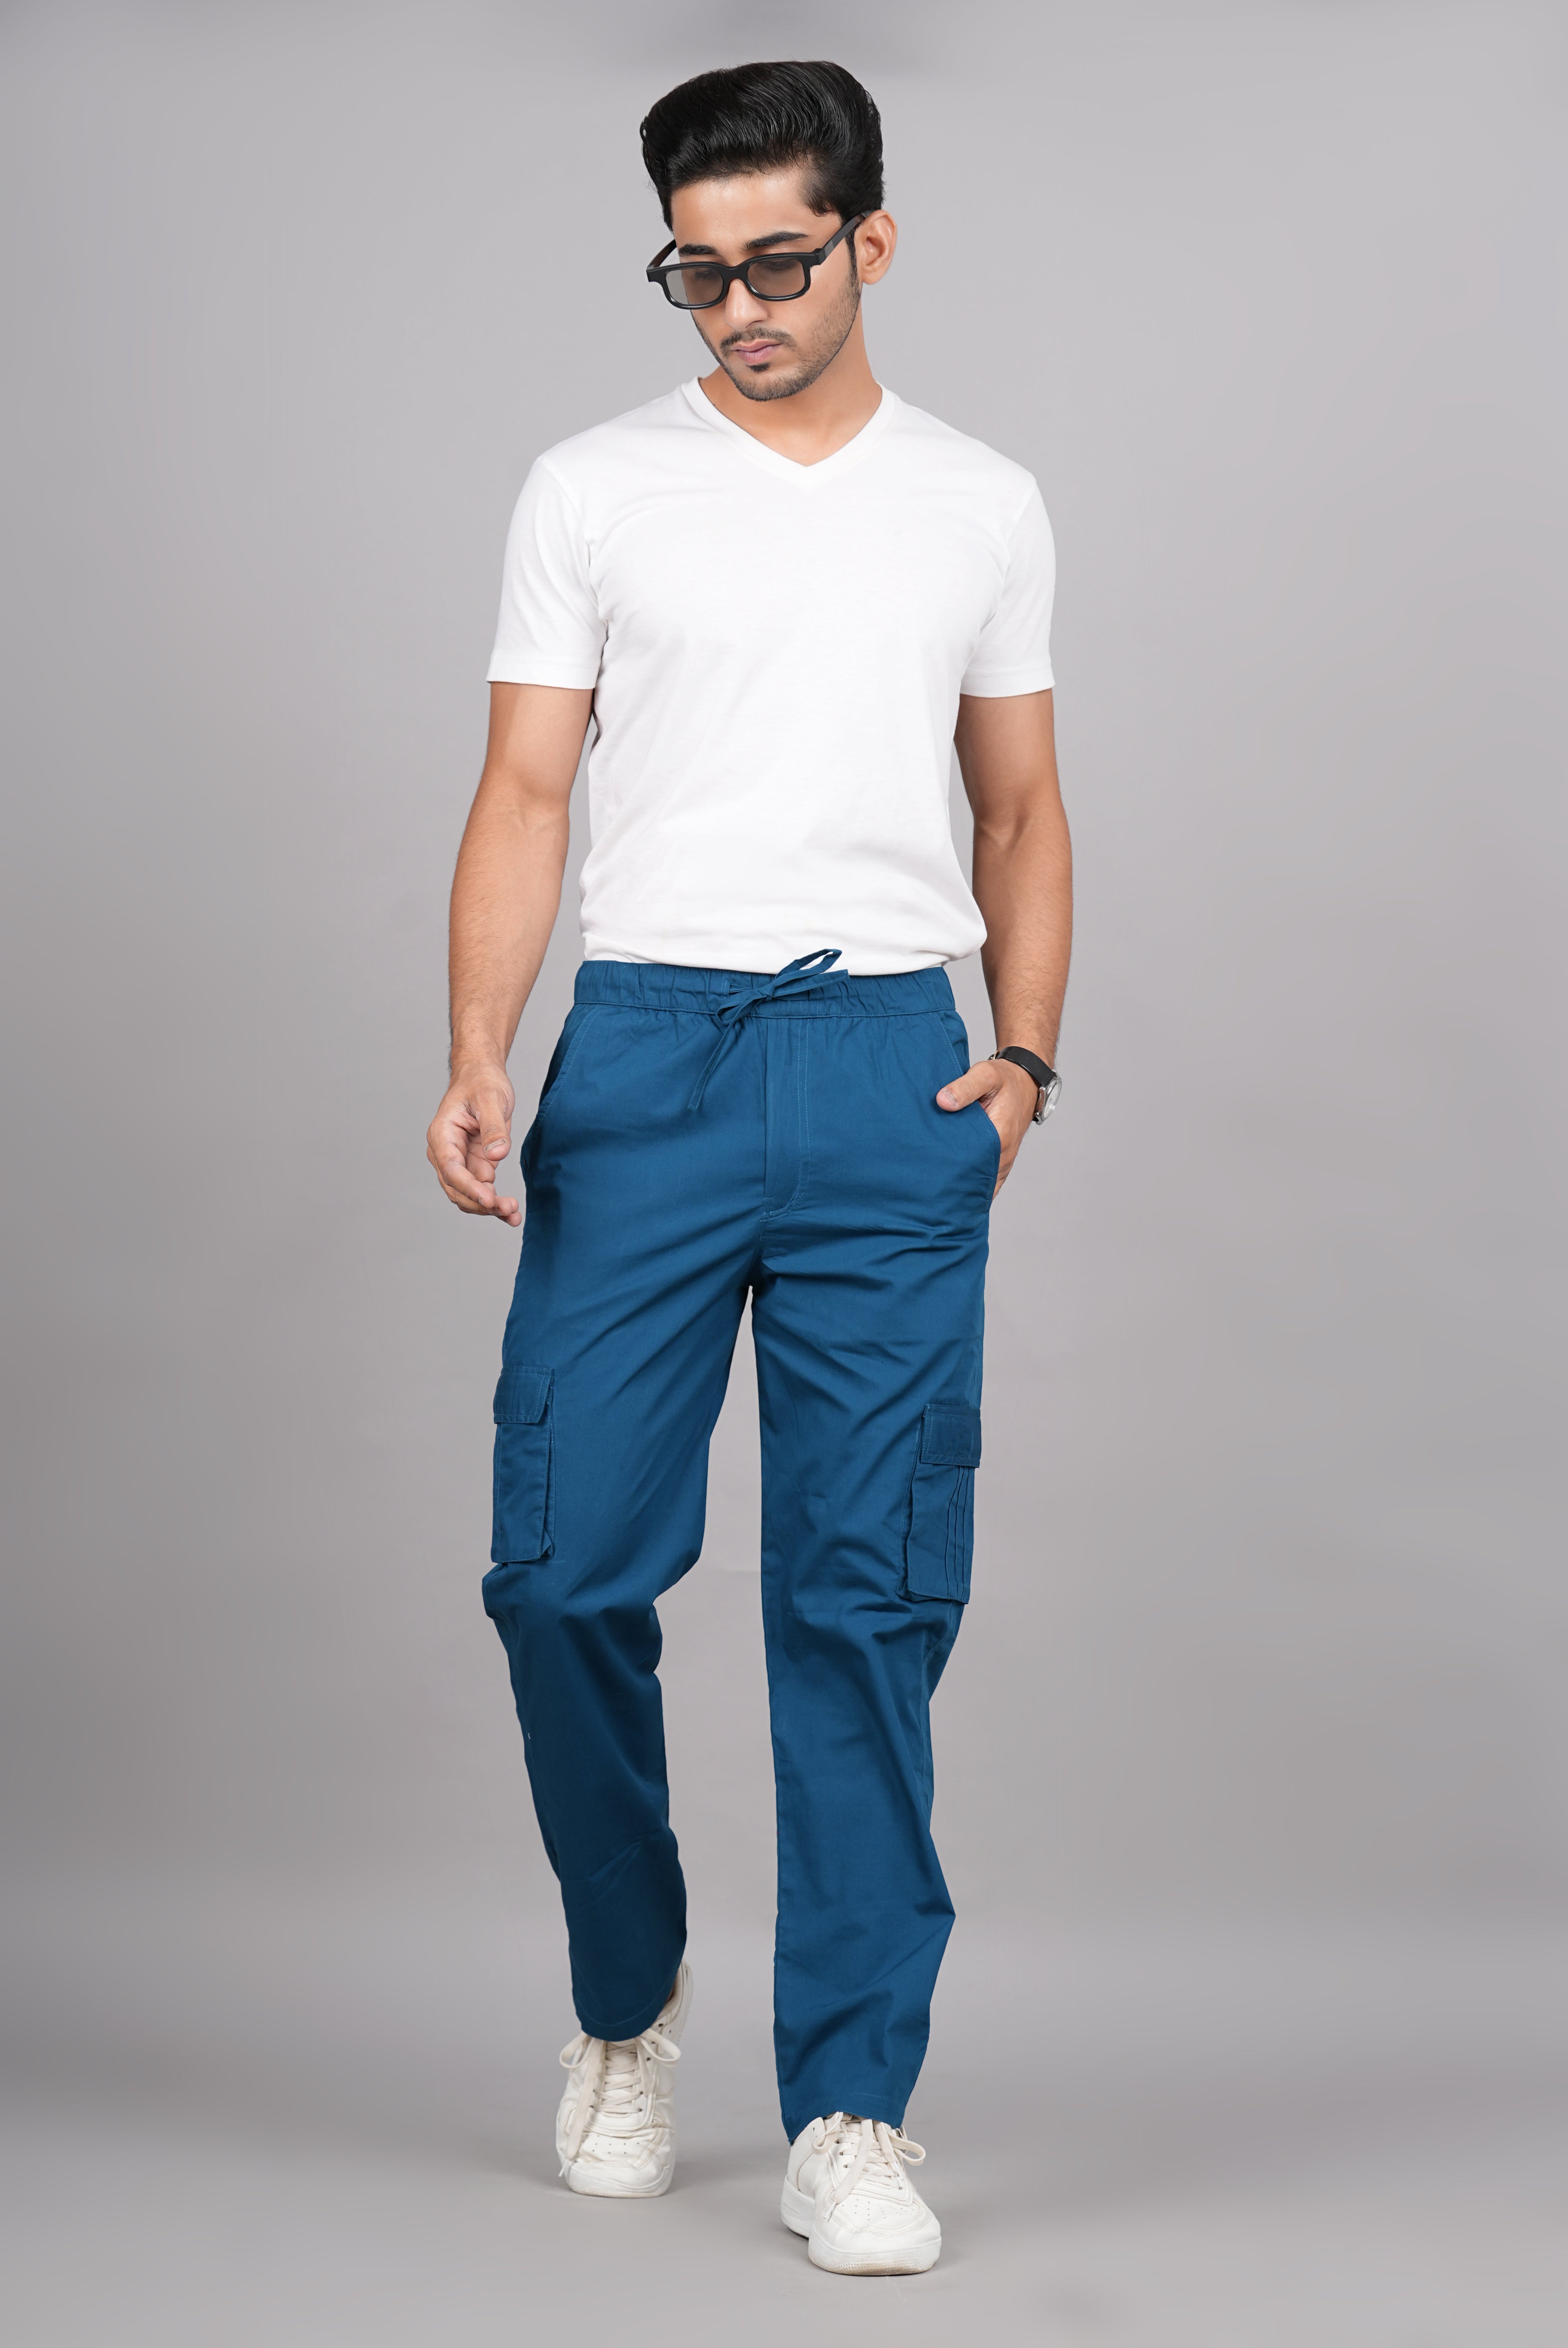 House of RP Men's Cotton DarkBlue Slim Fit Solid Cargos, Casual Trousers  with Cargo Pockets